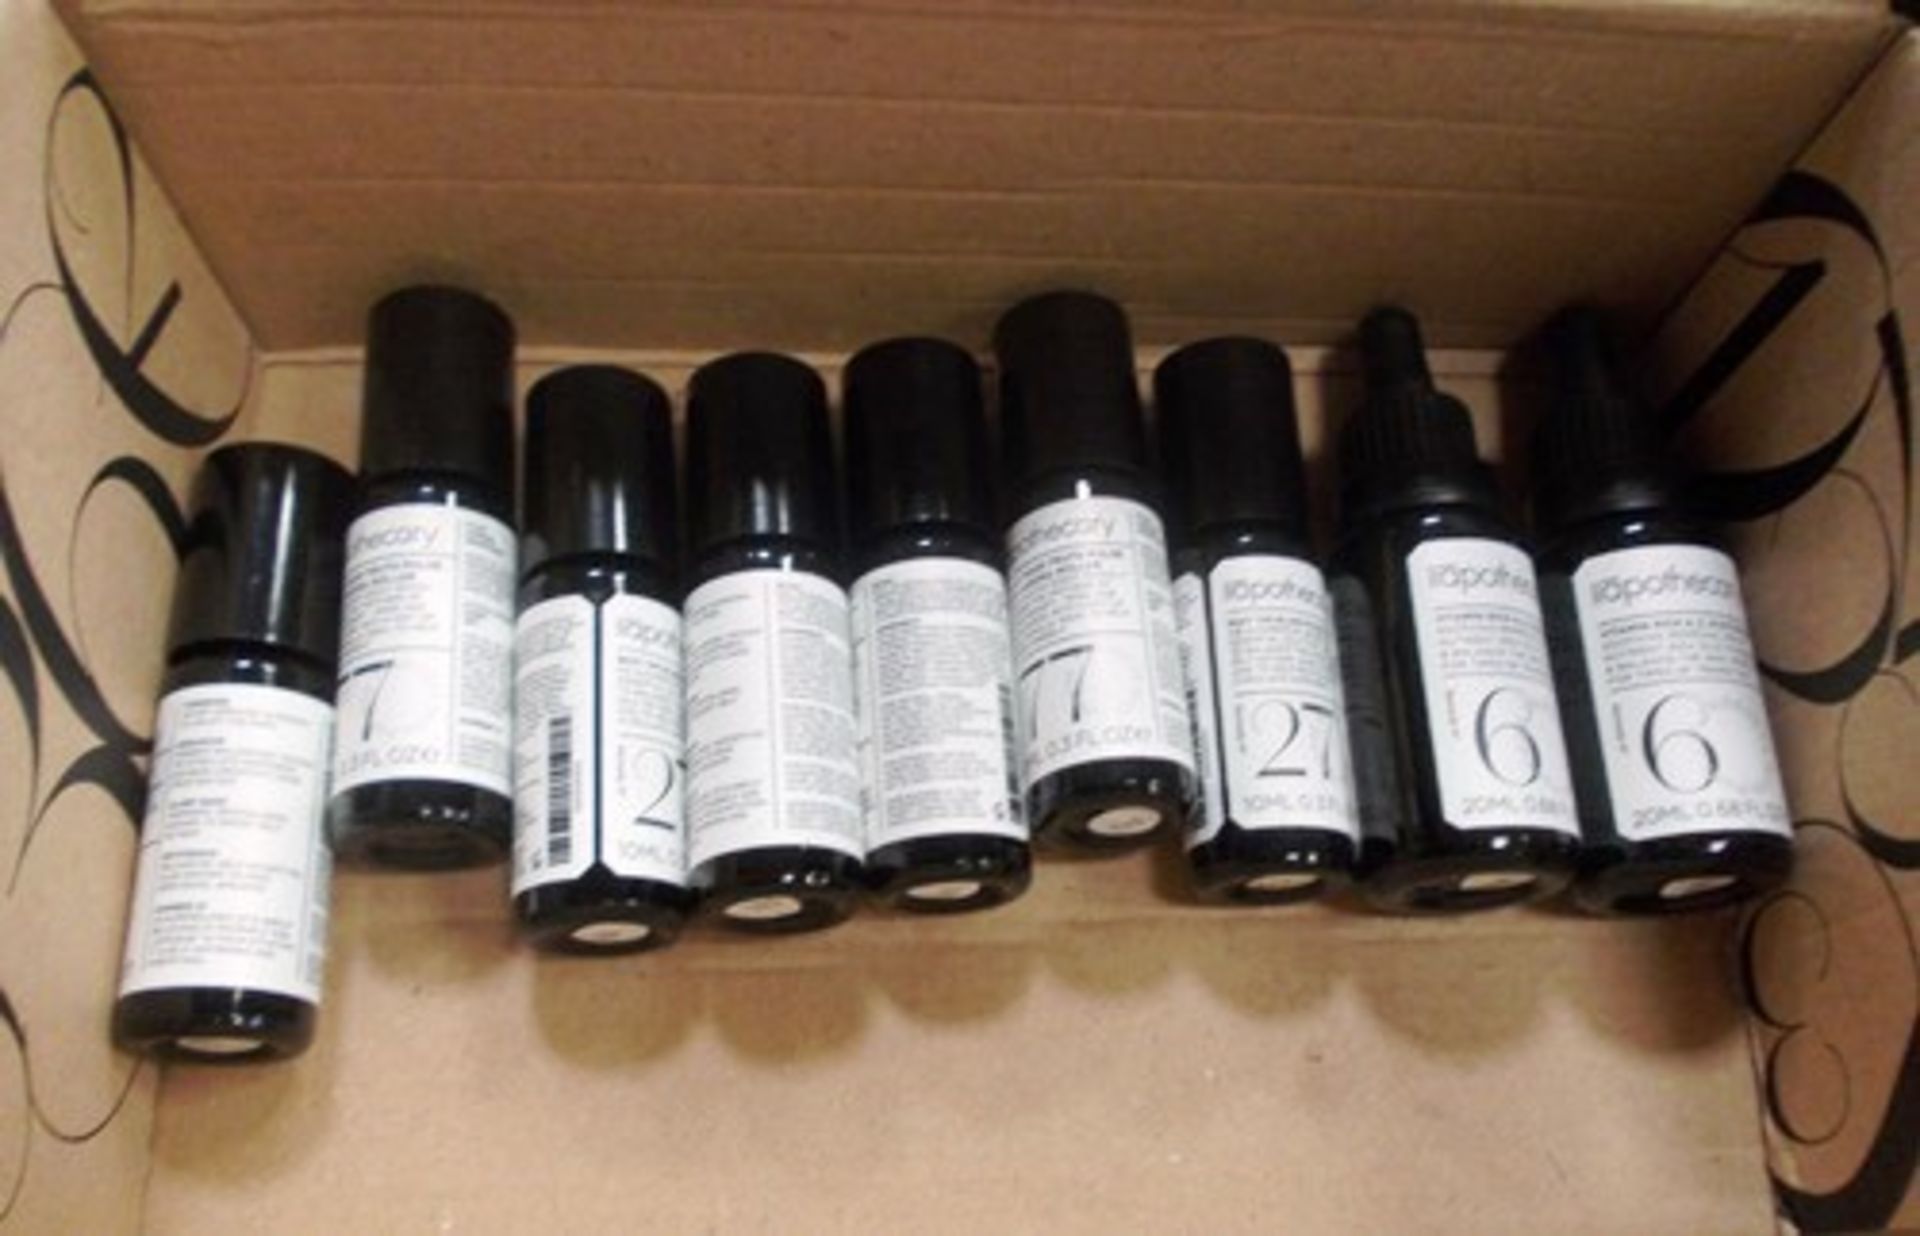 7 x 10ml bottles of ilapothecary Pulse Point and 2 x 20ml bottles of ilapothecary face oil - New (